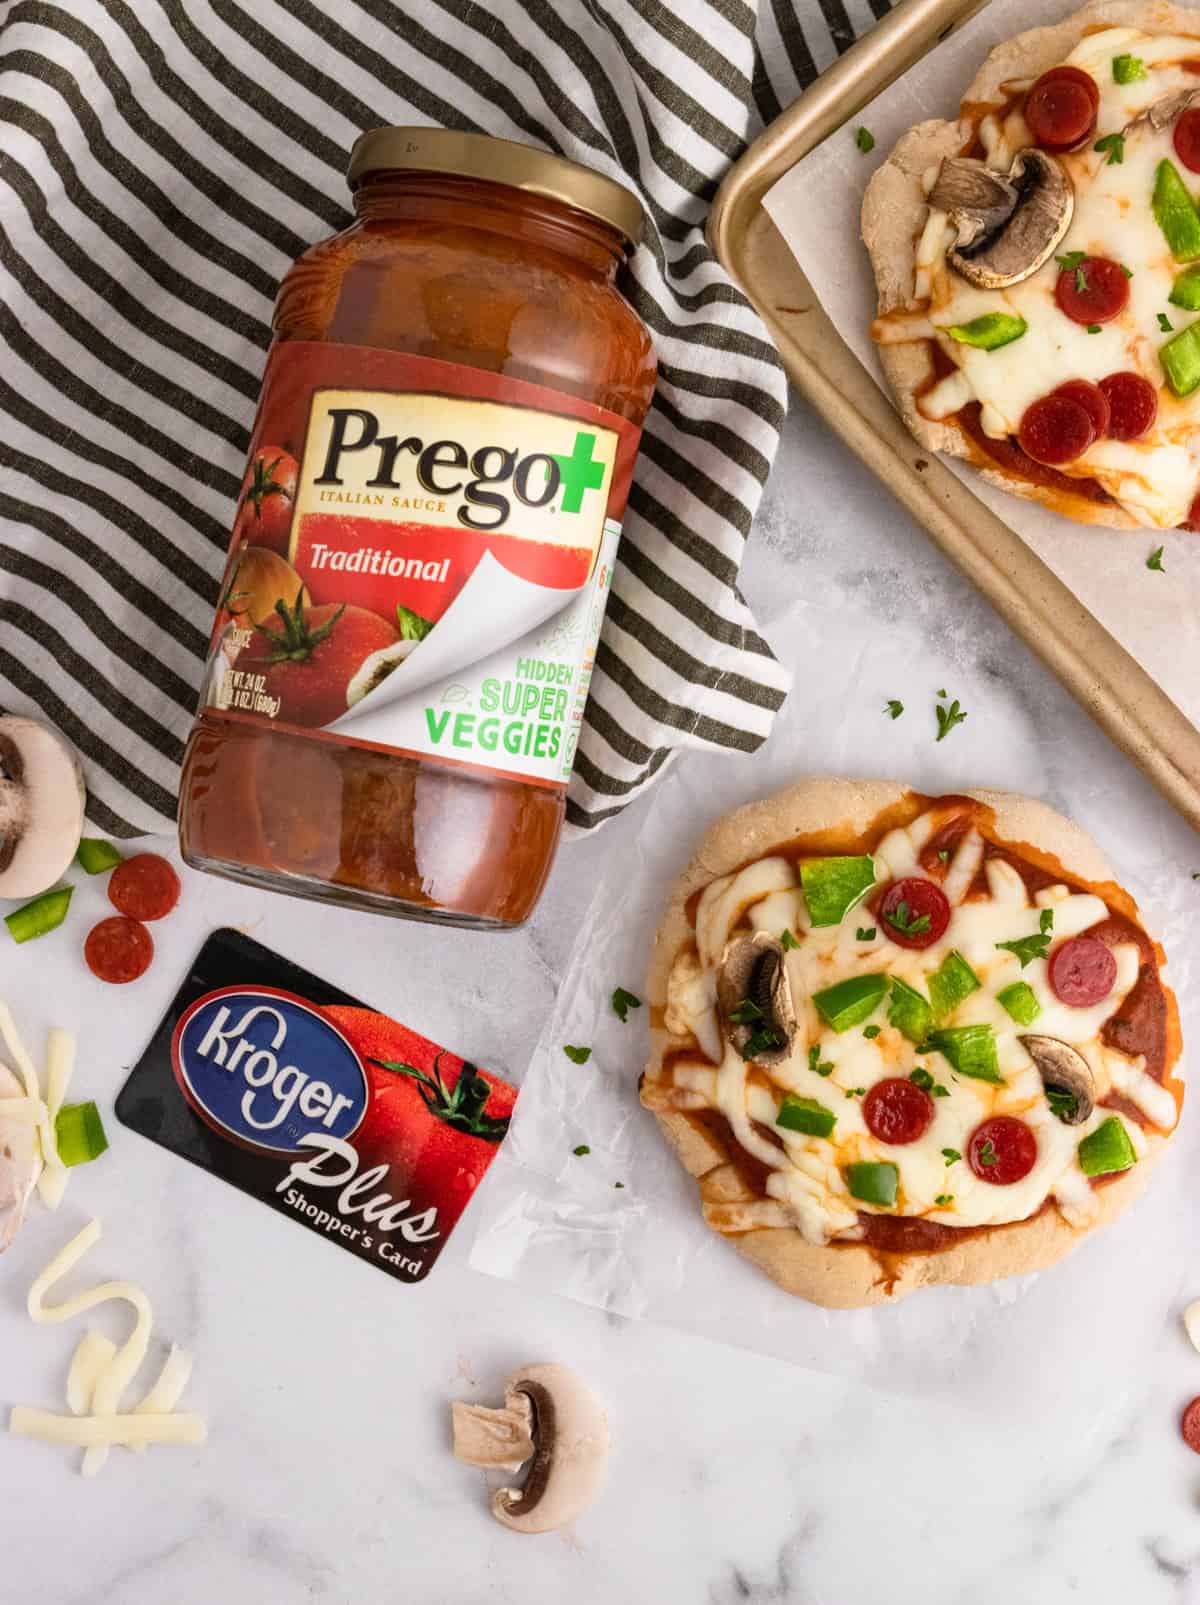 Prego and Kroger card with pizza on counter.